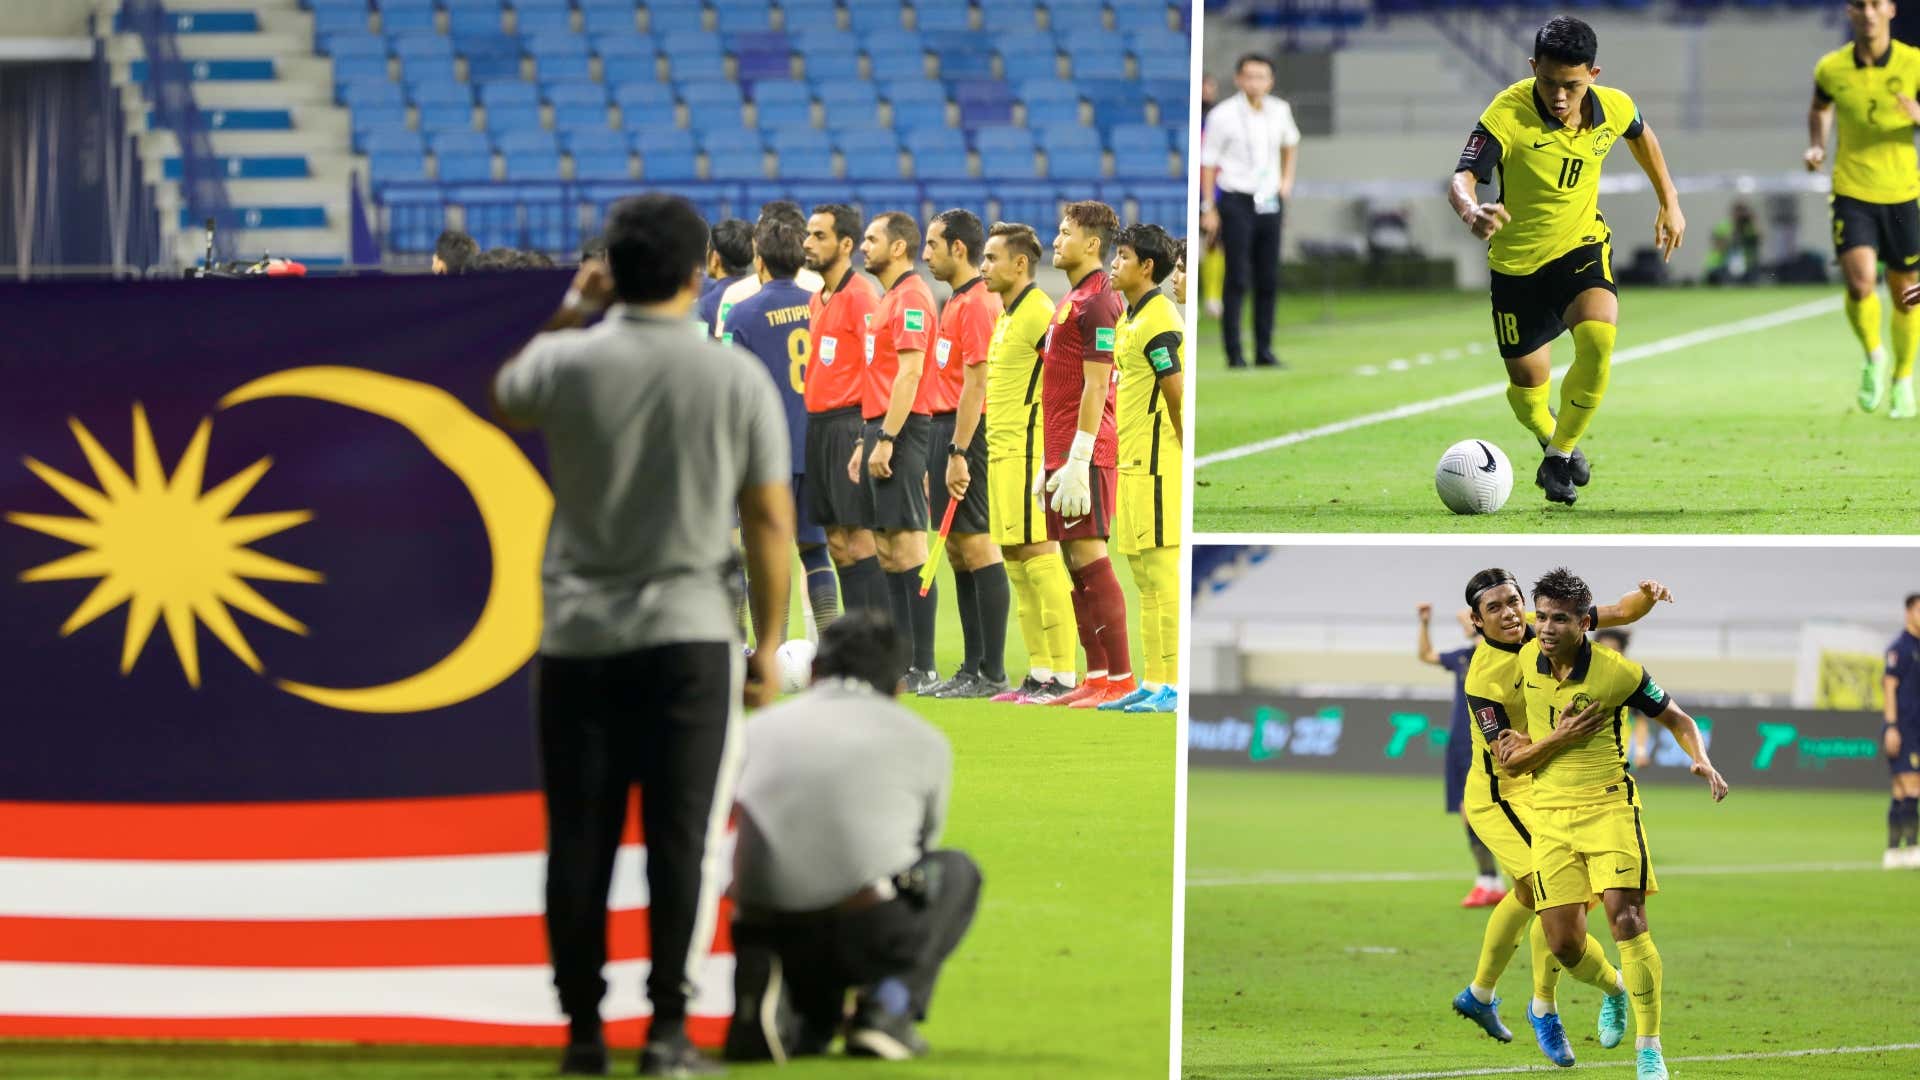 AFF Suzuki Cup: How to watch Malaysia at the AFF Championship 2020?